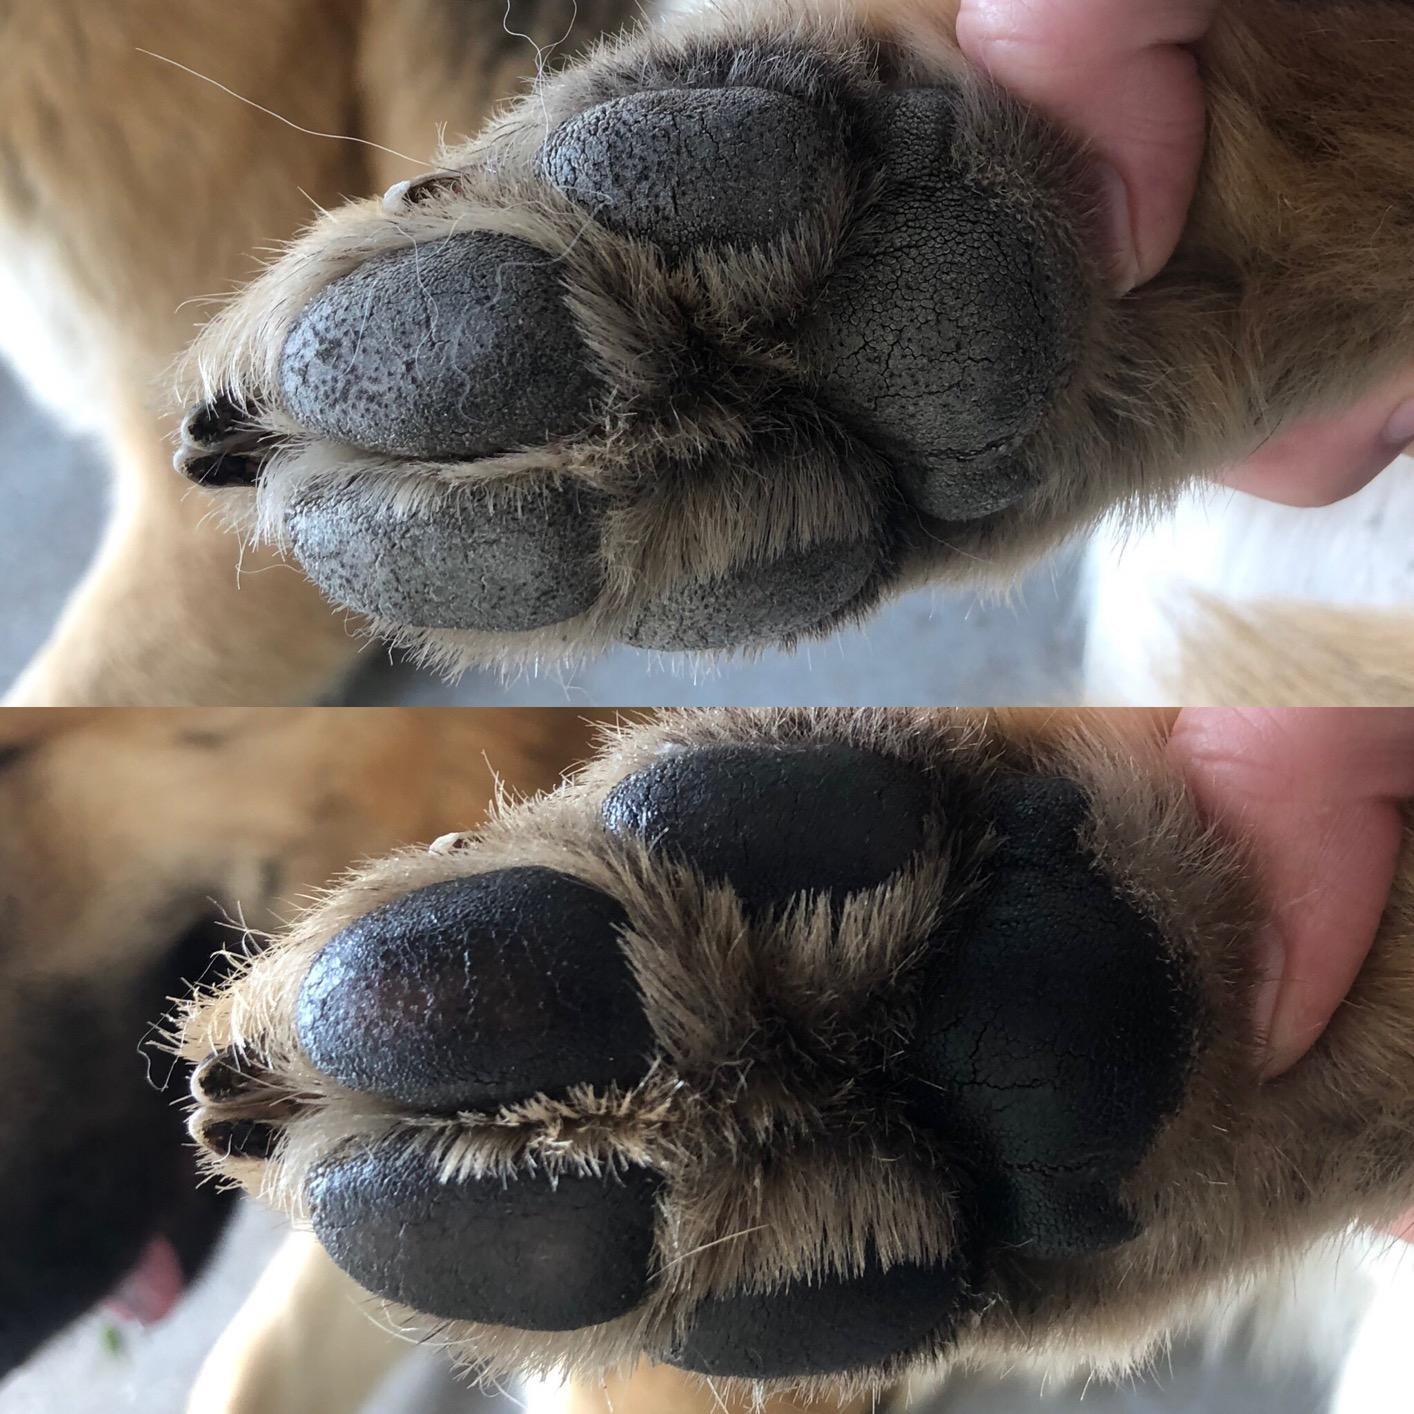 Before photo of a dog&#x27;s paw pads looking dry next to an after photo of the same dog&#x27;s paws looking moisturized after applying the balm